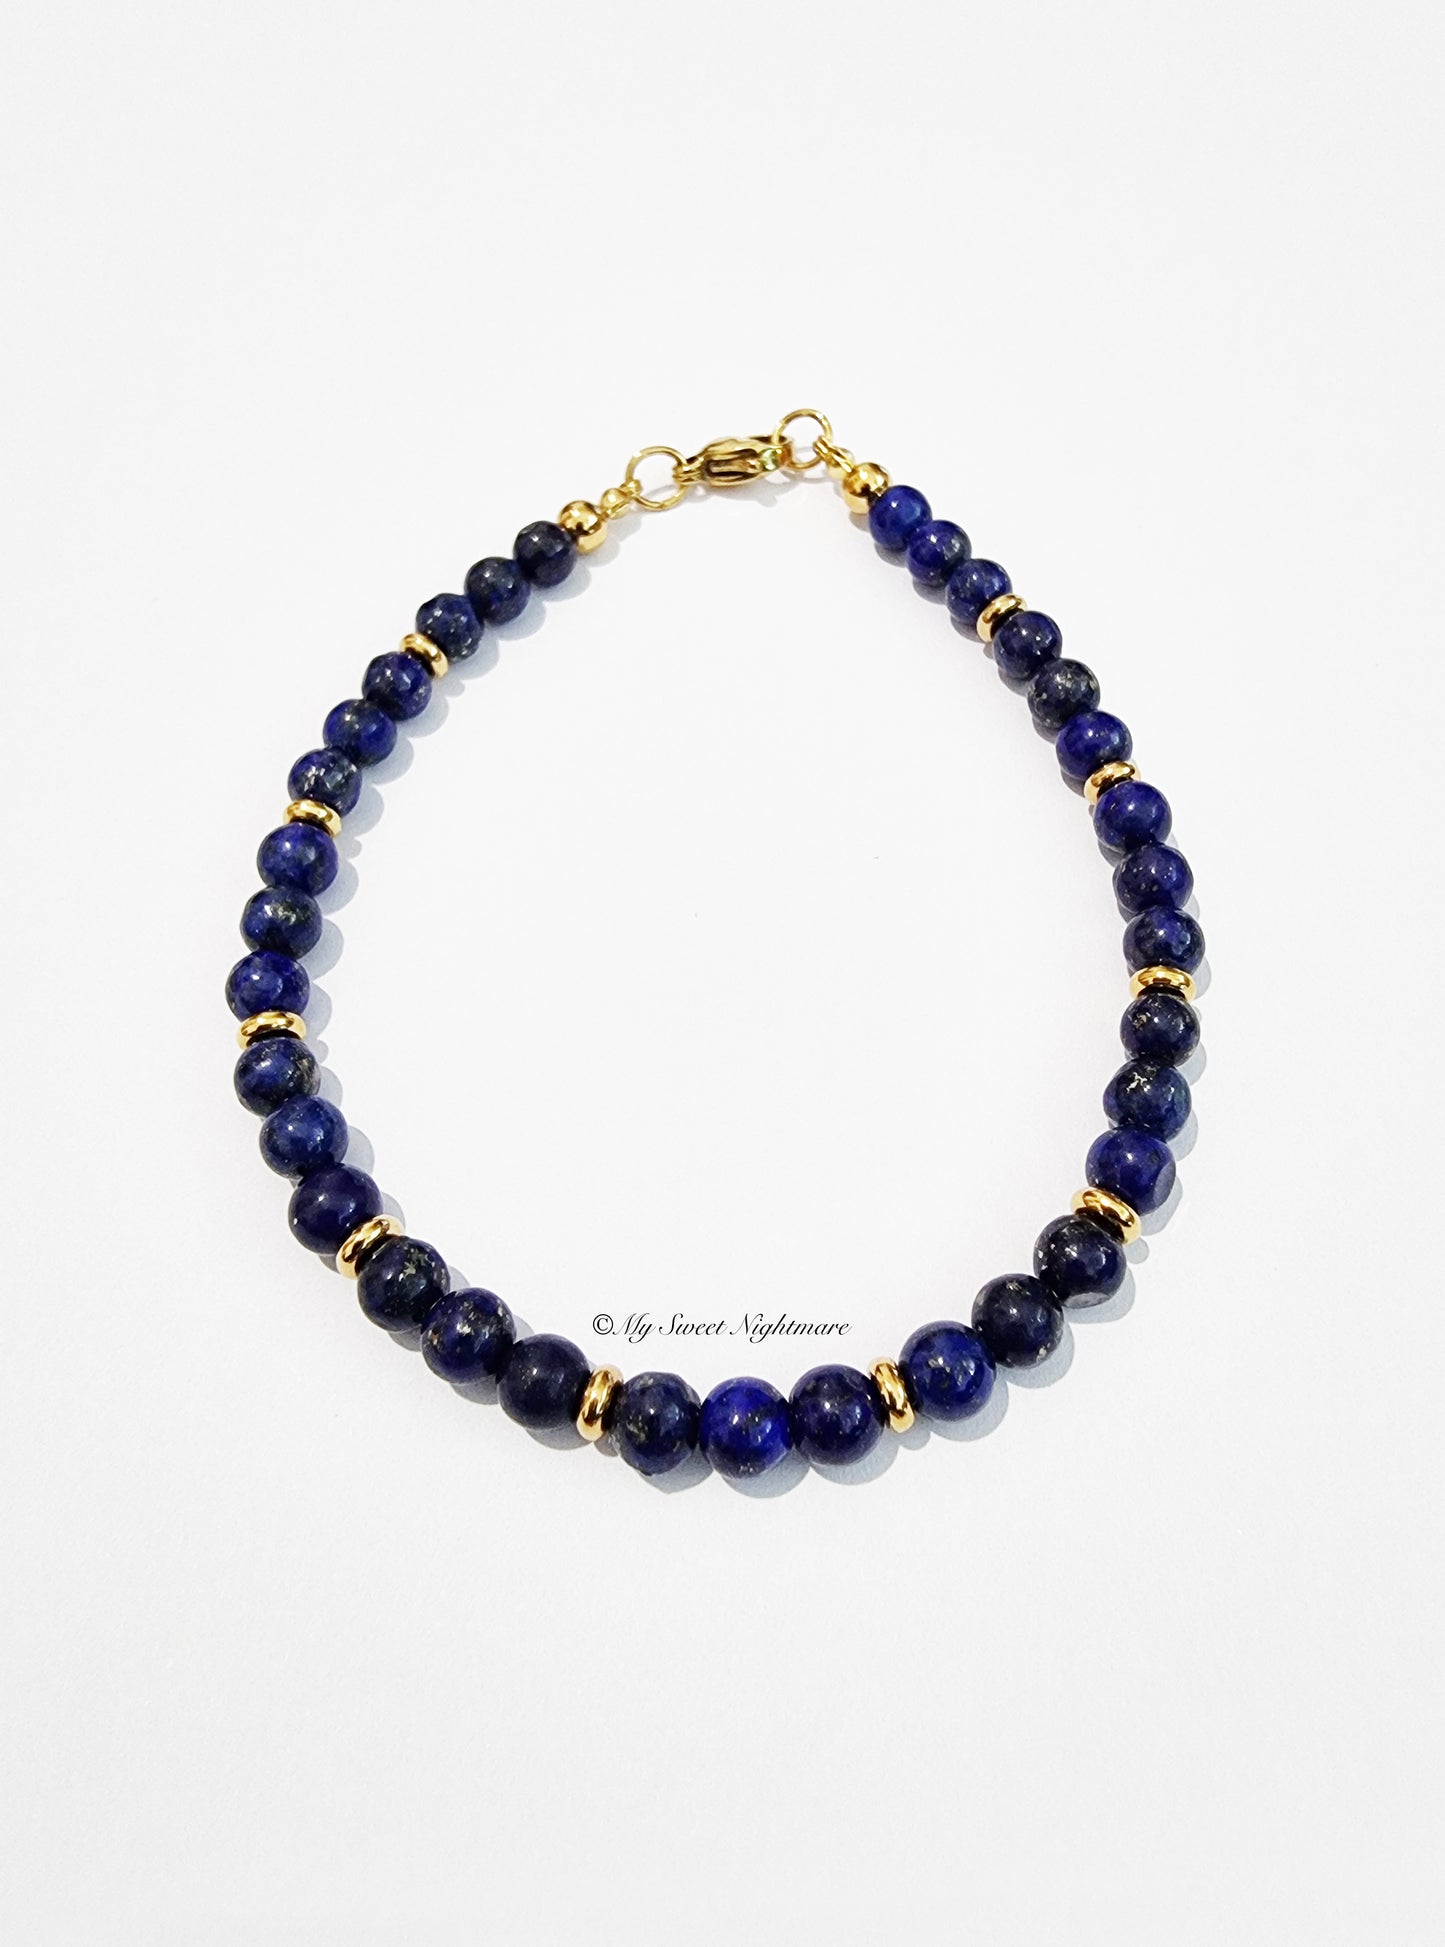 Bracelet in AA quality Lapis Lazuli and gold steel